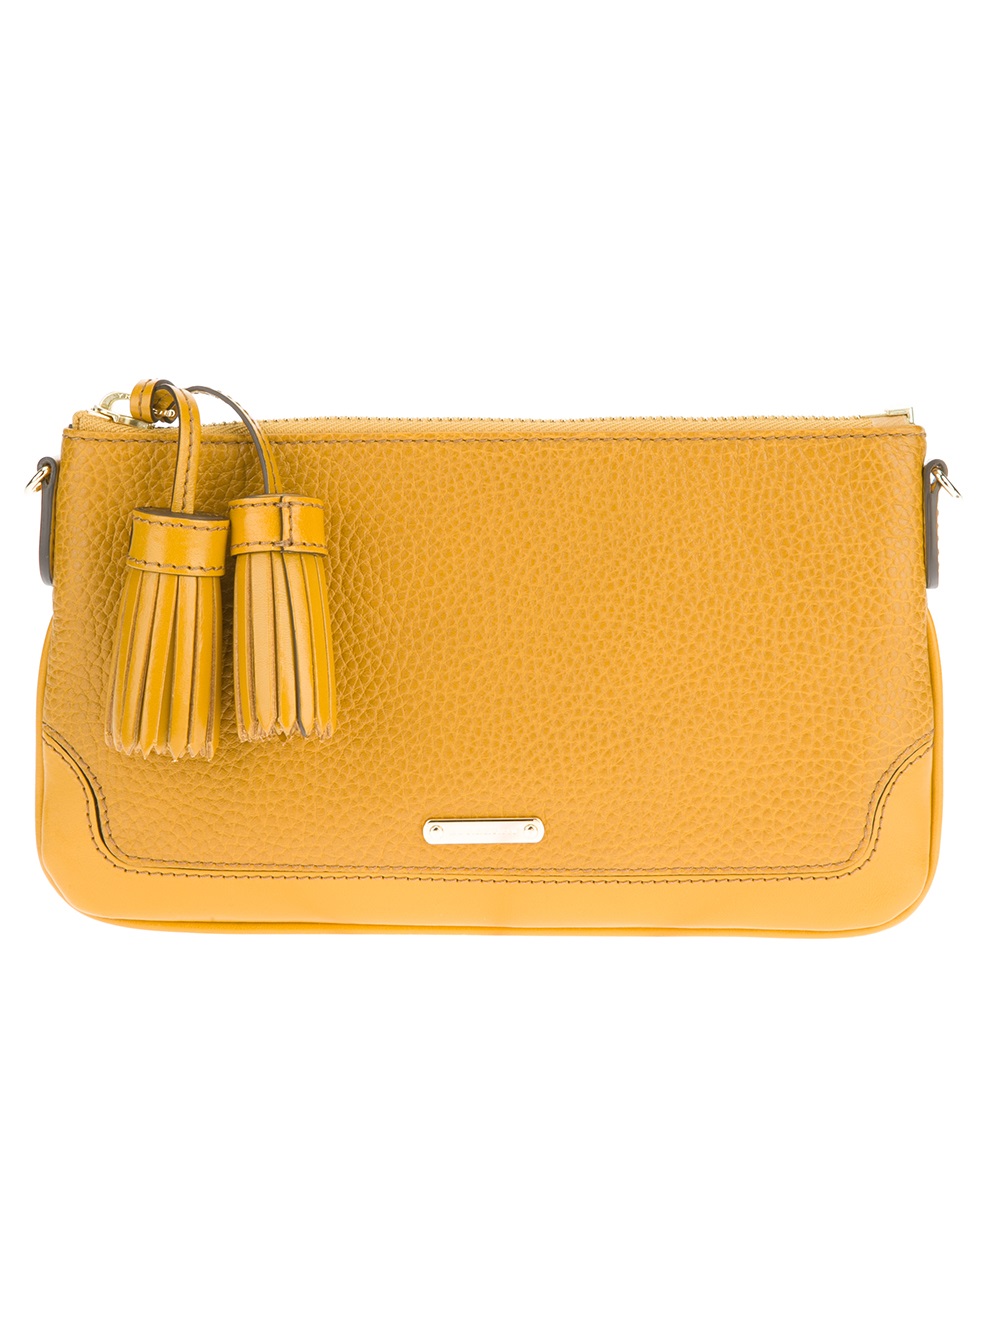 Burberry Chain Strap Shoulder Bag in Yellow (yellow & orange) | Lyst